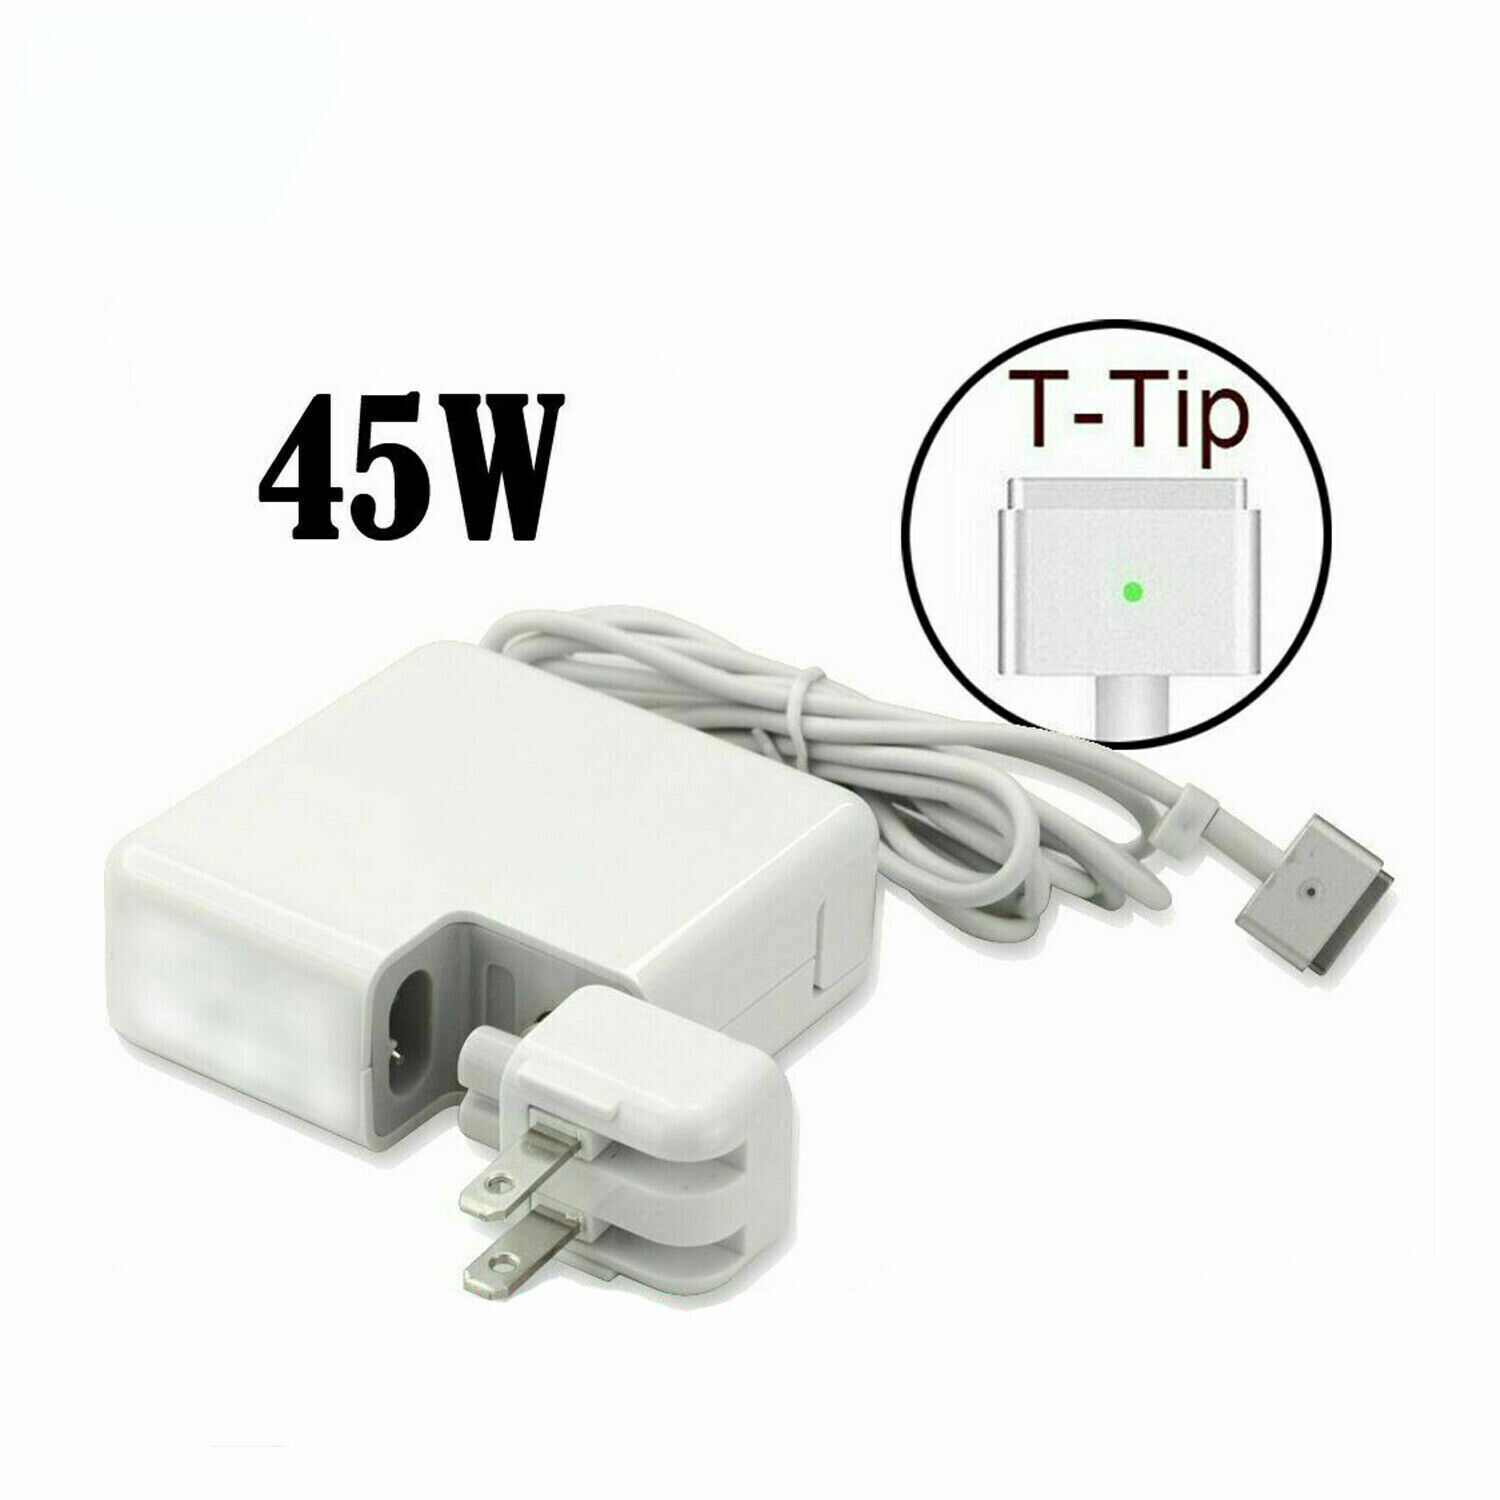 45W AC Power Adapter for Macbook Air Charger A1435 A1465 A1436 A1466 Mid 2012-14